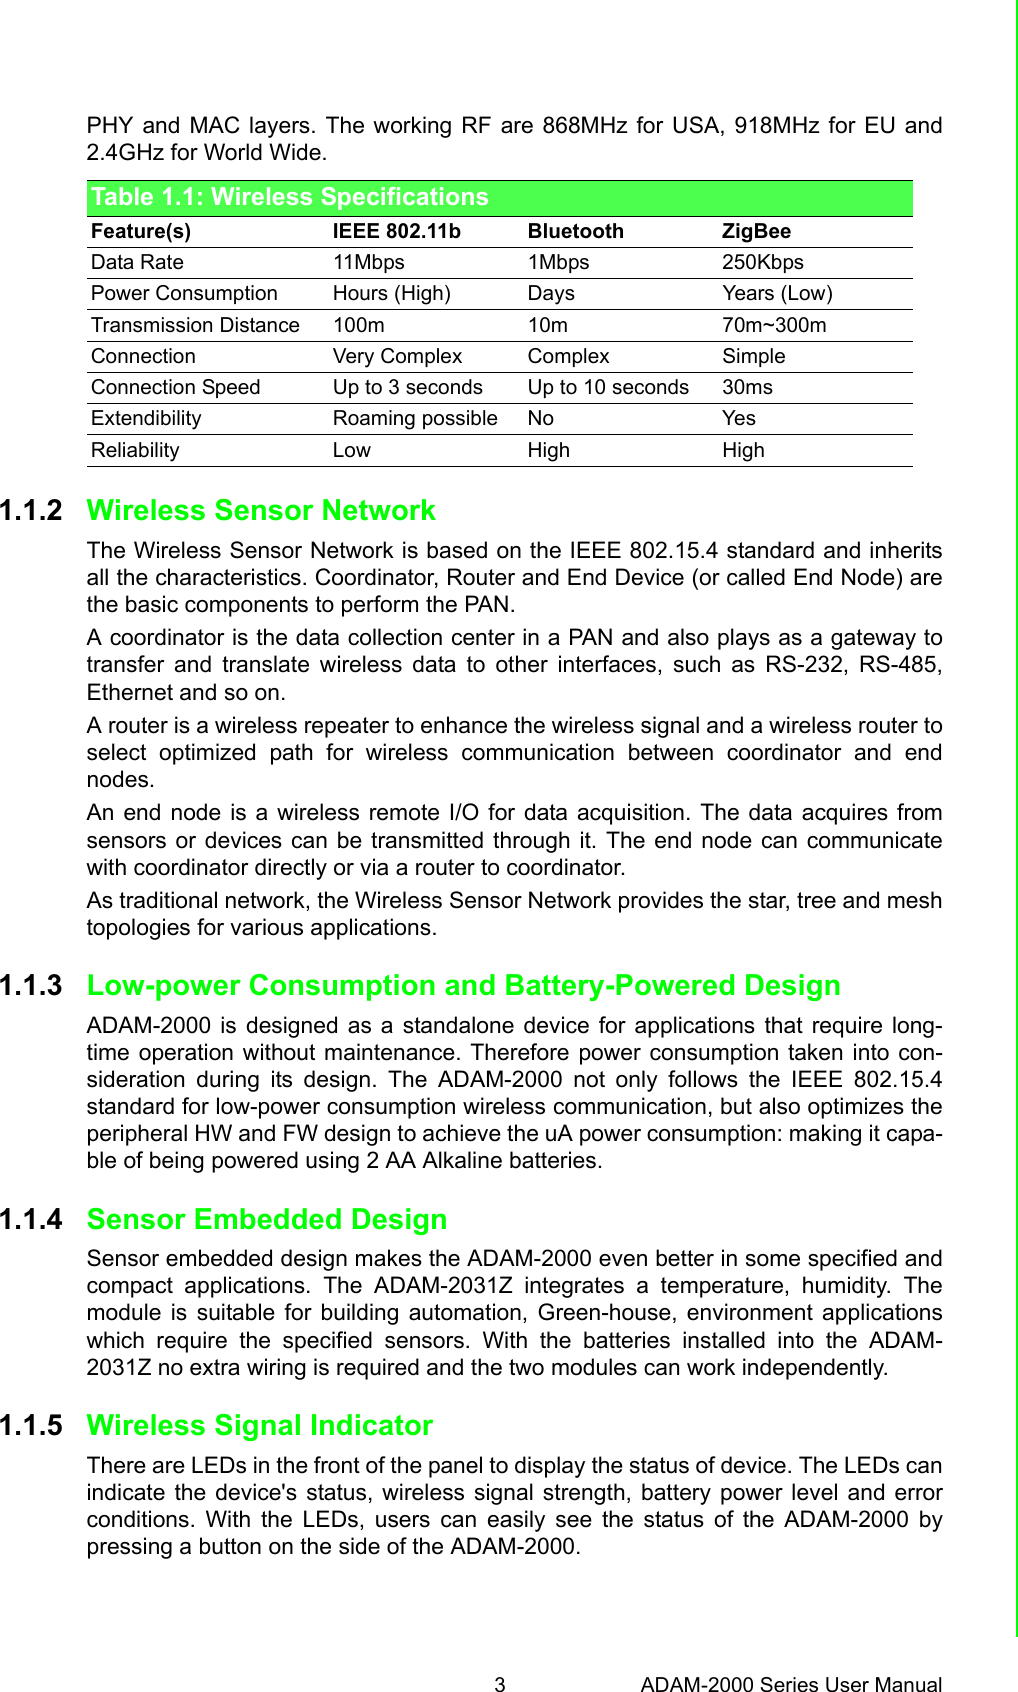 3 ADAM-2000 Series User ManualChapter 1 Understanding Your SystemPHY and MAC layers. The working RF are 868MHz for USA, 918MHz for EU and2.4GHz for World Wide.1.1.2 Wireless Sensor Network The Wireless Sensor Network is based on the IEEE 802.15.4 standard and inheritsall the characteristics. Coordinator, Router and End Device (or called End Node) arethe basic components to perform the PAN.A coordinator is the data collection center in a PAN and also plays as a gateway totransfer and translate wireless data to other interfaces, such as RS-232, RS-485,Ethernet and so on.A router is a wireless repeater to enhance the wireless signal and a wireless router toselect optimized path for wireless communication between coordinator and endnodes.An end node is a wireless remote I/O for data acquisition. The data acquires fromsensors or devices can be transmitted through it. The end node can communicatewith coordinator directly or via a router to coordinator.As traditional network, the Wireless Sensor Network provides the star, tree and meshtopologies for various applications.1.1.3 Low-power Consumption and Battery-Powered DesignADAM-2000 is designed as a standalone device for applications that require long-time operation without maintenance. Therefore power consumption taken into con-sideration during its design. The ADAM-2000 not only follows the IEEE 802.15.4standard for low-power consumption wireless communication, but also optimizes theperipheral HW and FW design to achieve the uA power consumption: making it capa-ble of being powered using 2 AA Alkaline batteries.1.1.4 Sensor Embedded DesignSensor embedded design makes the ADAM-2000 even better in some specified andcompact applications. The ADAM-2031Z integrates a temperature, humidity. Themodule is suitable for building automation, Green-house, environment applicationswhich require the specified sensors. With the batteries installed into the ADAM-2031Z no extra wiring is required and the two modules can work independently.1.1.5 Wireless Signal IndicatorThere are LEDs in the front of the panel to display the status of device. The LEDs canindicate the device&apos;s status, wireless signal strength, battery power level and errorconditions. With the LEDs, users can easily see the status of the ADAM-2000 bypressing a button on the side of the ADAM-2000.Table 1.1: Wireless SpecificationsFeature(s) IEEE 802.11b Bluetooth ZigBeeData Rate 11Mbps 1Mbps 250KbpsPower Consumption Hours (High) Days Years (Low)Transmission Distance 100m 10m 70m~300mConnection Very Complex Complex SimpleConnection Speed Up to 3 seconds Up to 10 seconds 30msExtendibility Roaming possible No YesReliability Low High High